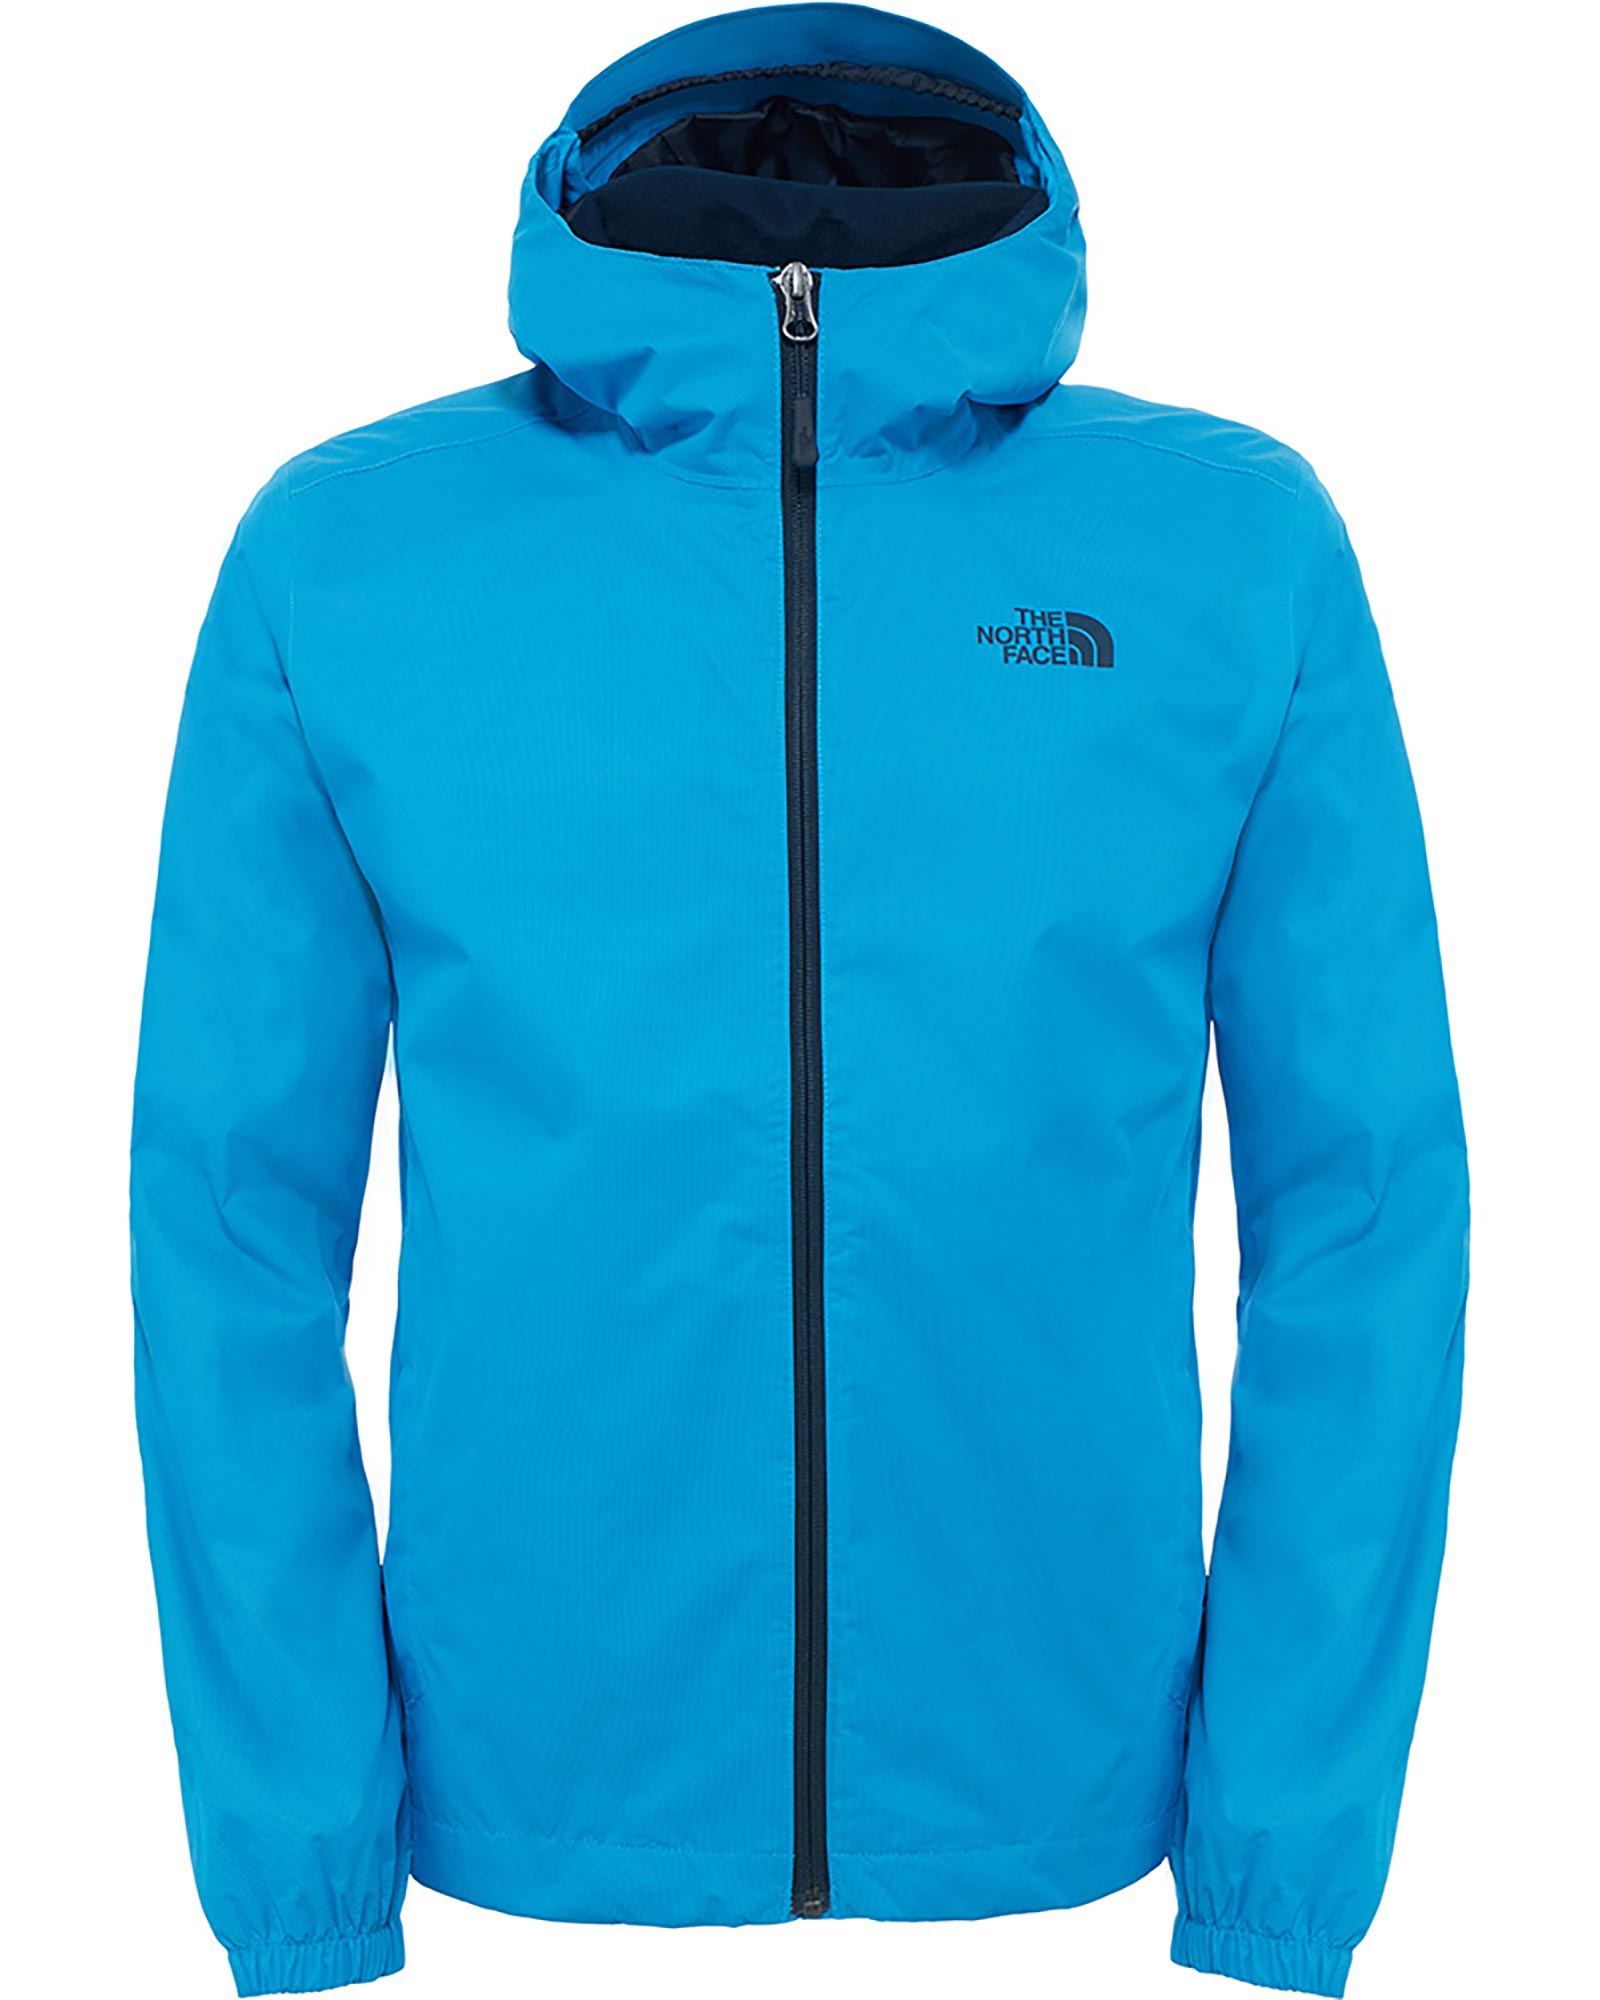 The North Face Quest DryVent Men’s Jacket - Optic Blue Black Heather M